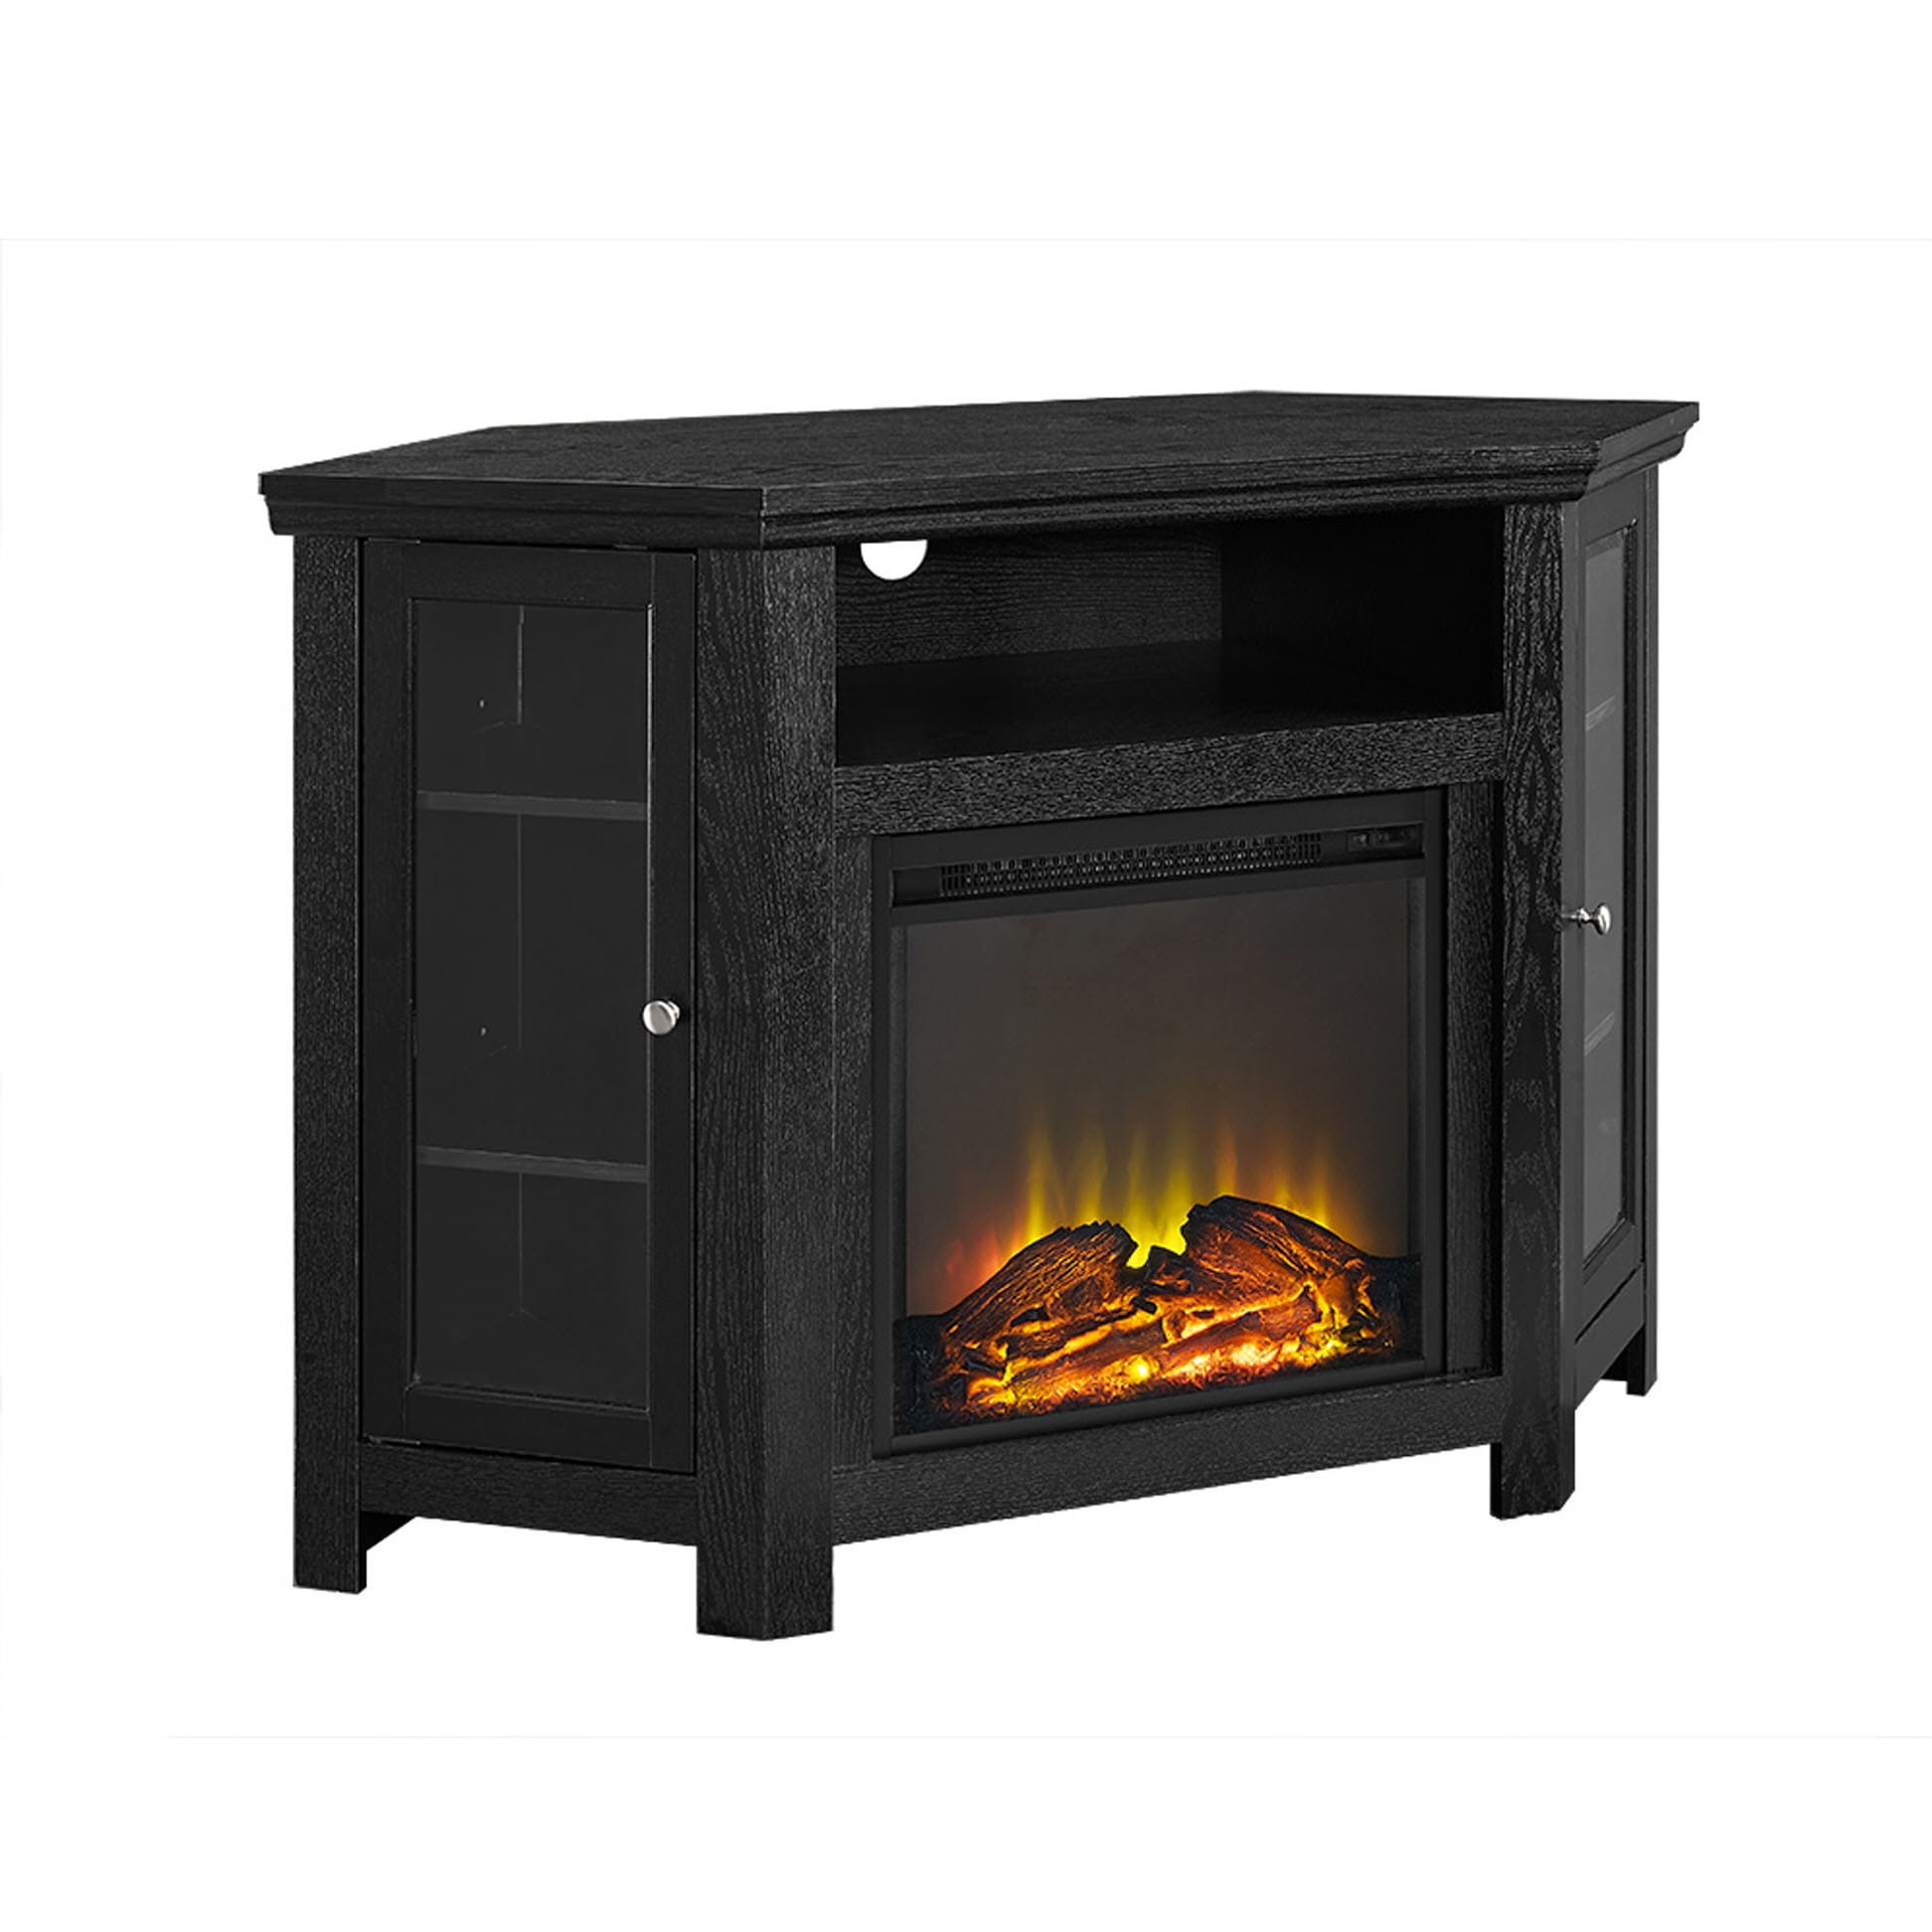 Best ideas about Fireplace Tv Stand Black
. Save or Pin Jackson 48 Inch Corner Fireplace TV Stand Black by Now.